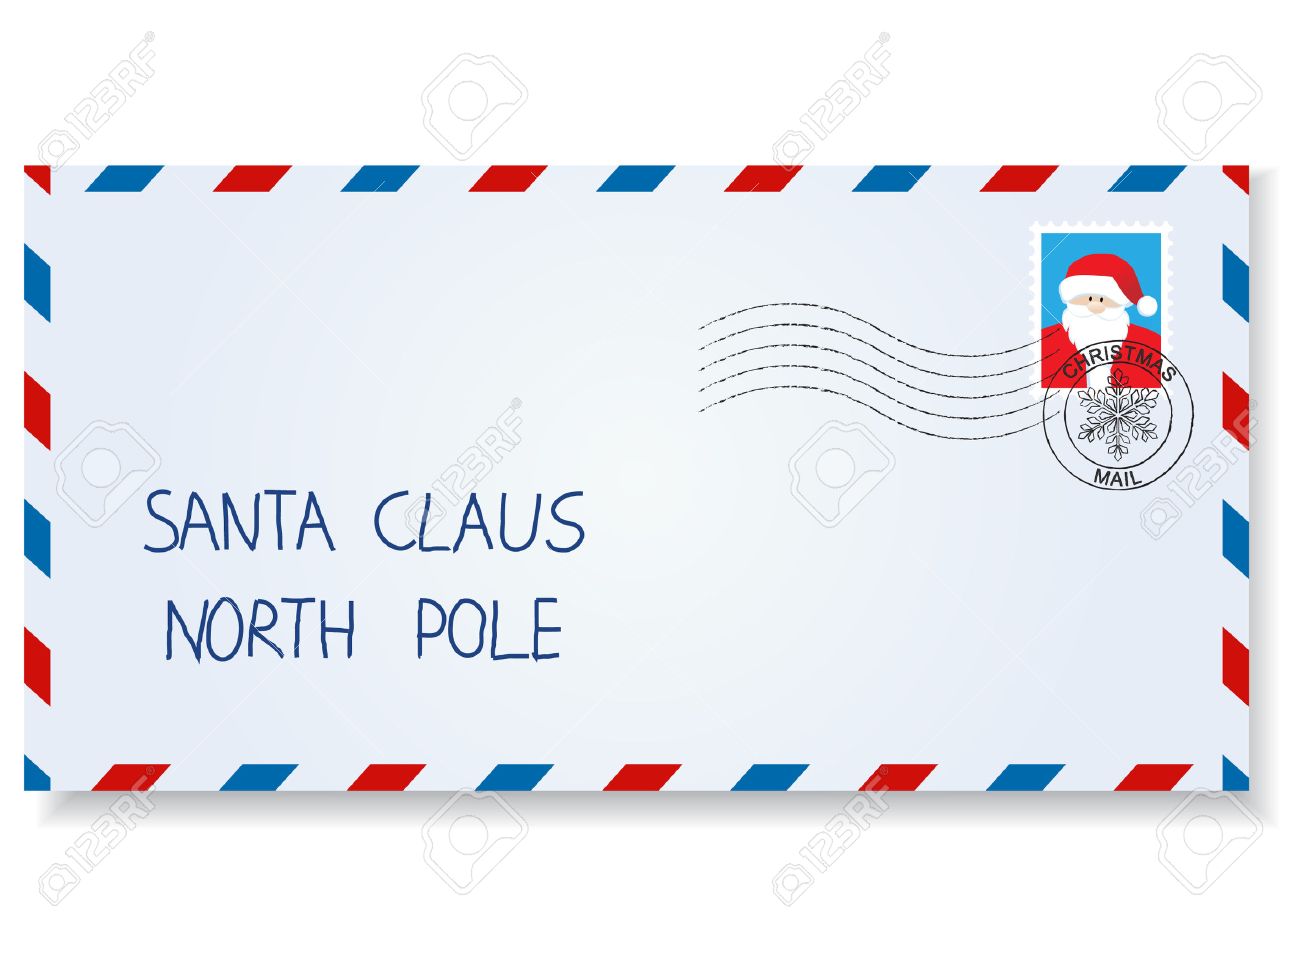 letter to santa claus with stamps and postage marks.